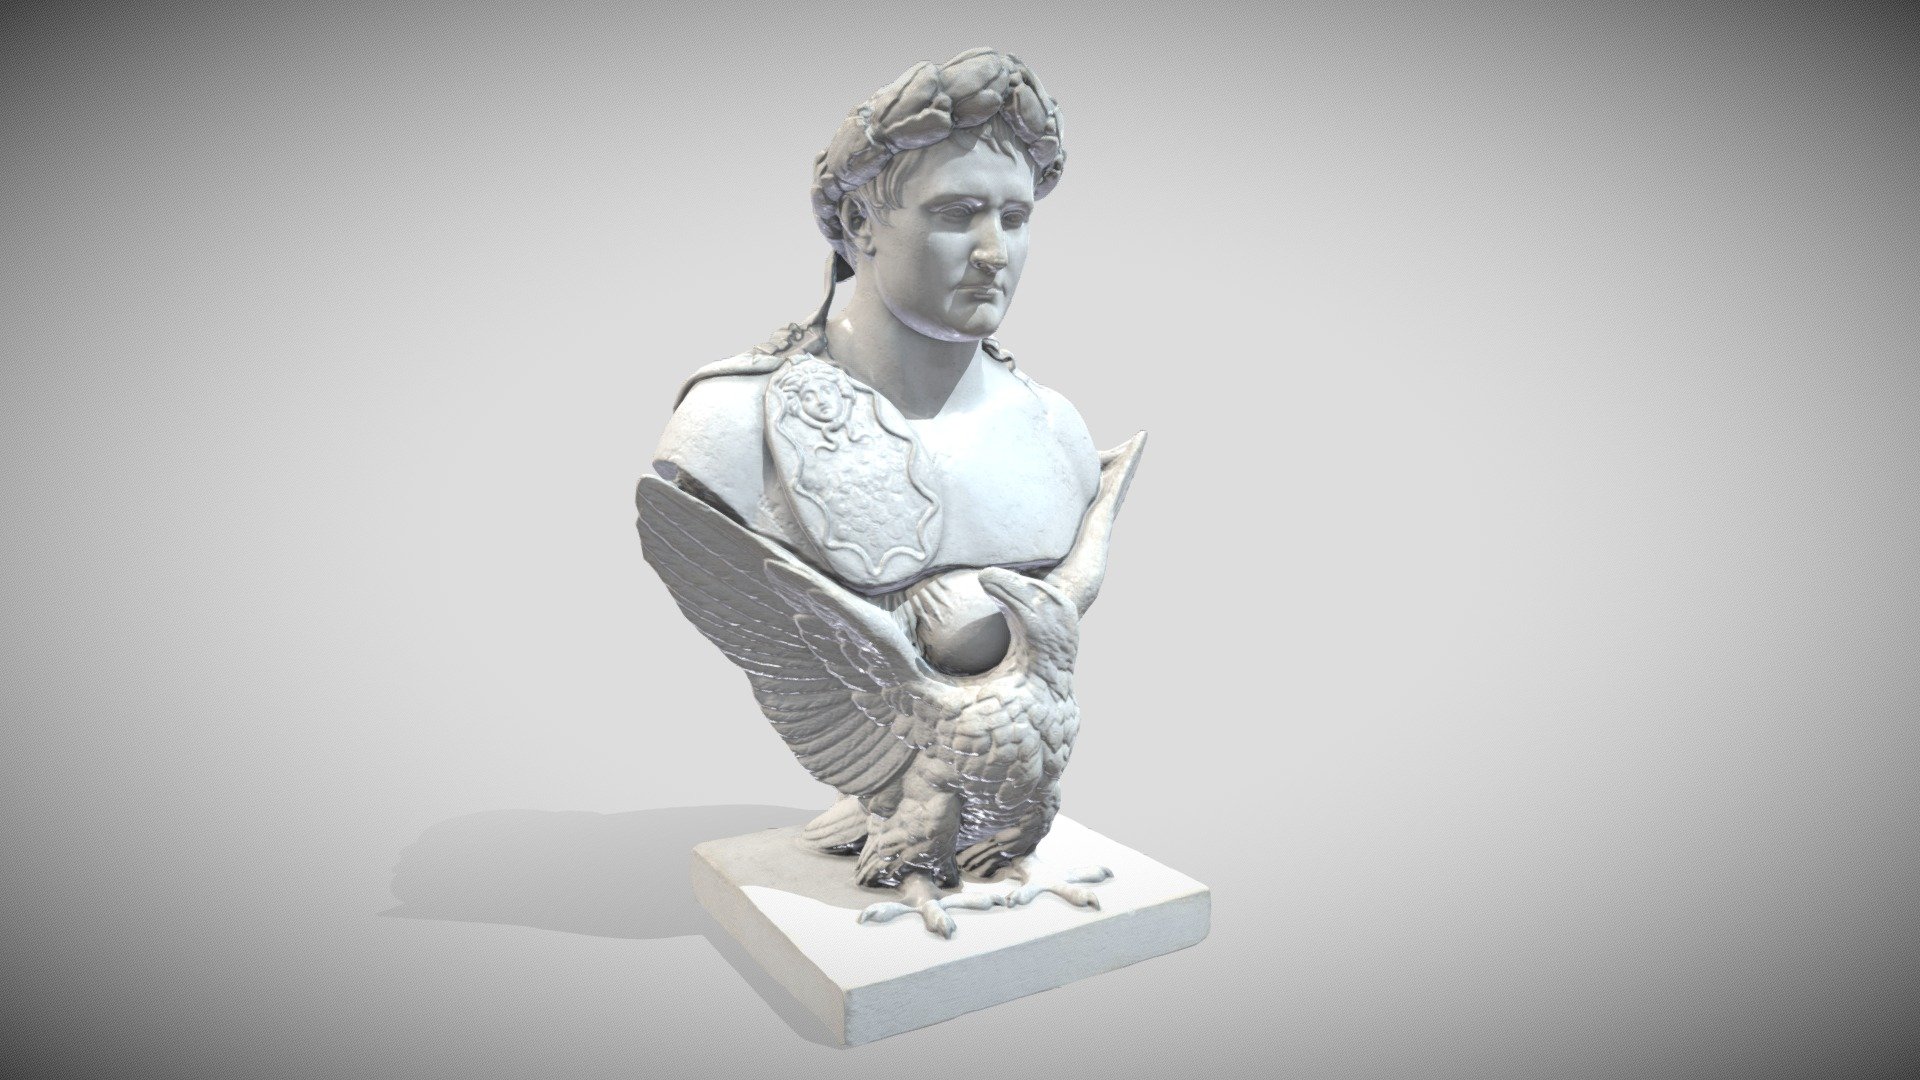 Original very nice 3D Scan from the Thorvaldsens Museum

https://www.myminifactory.com/object/3d-print-napoleon-bonaparte-107767

here the Painted Gaming Version LR....

One Material 4k PBR Metalness

All Quad - Napoleon Bust - Buy Royalty Free 3D model by Francesco Coldesina (@topfrank2013) 3d model